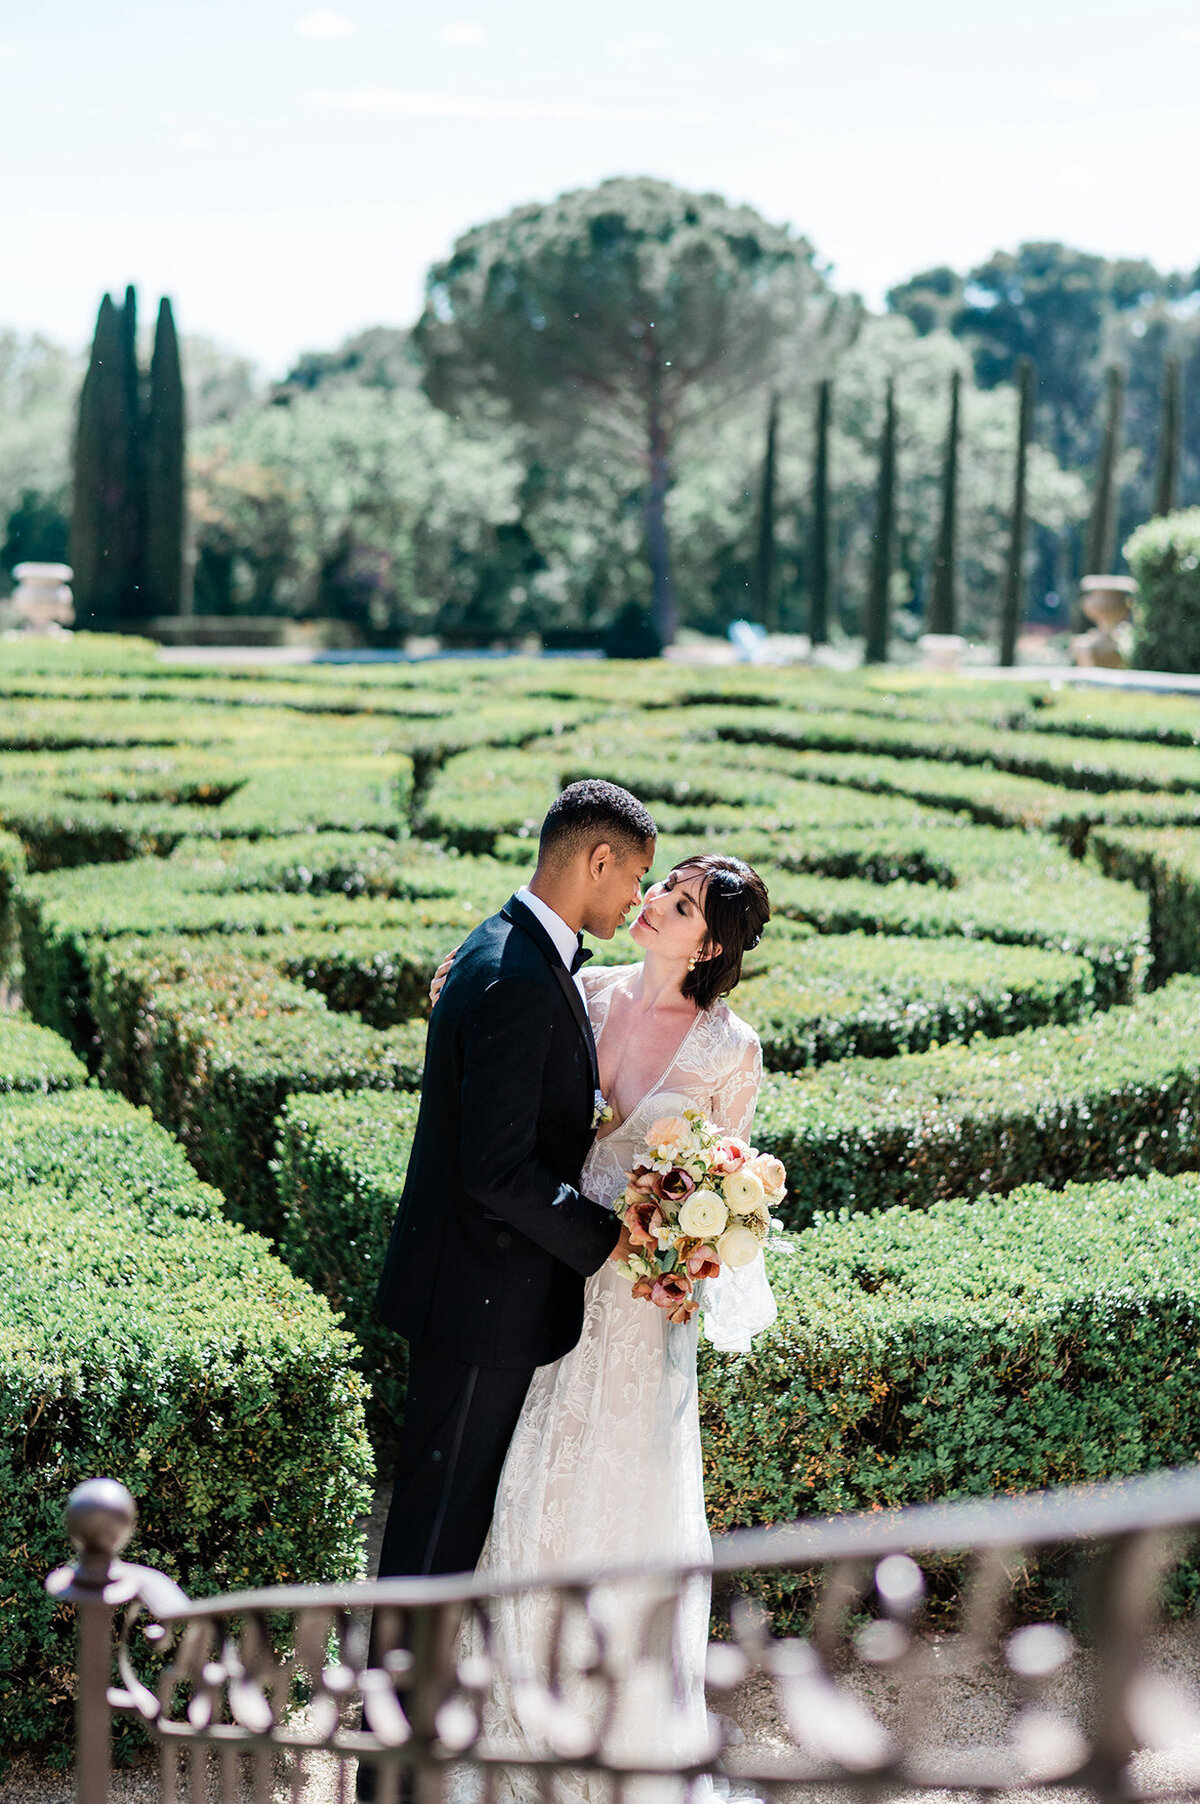 From candid exchanges to profound vows, our luxury wedding photography captures the essence of your French celebration. Our fine art approach turns every moment into a timeless memory.